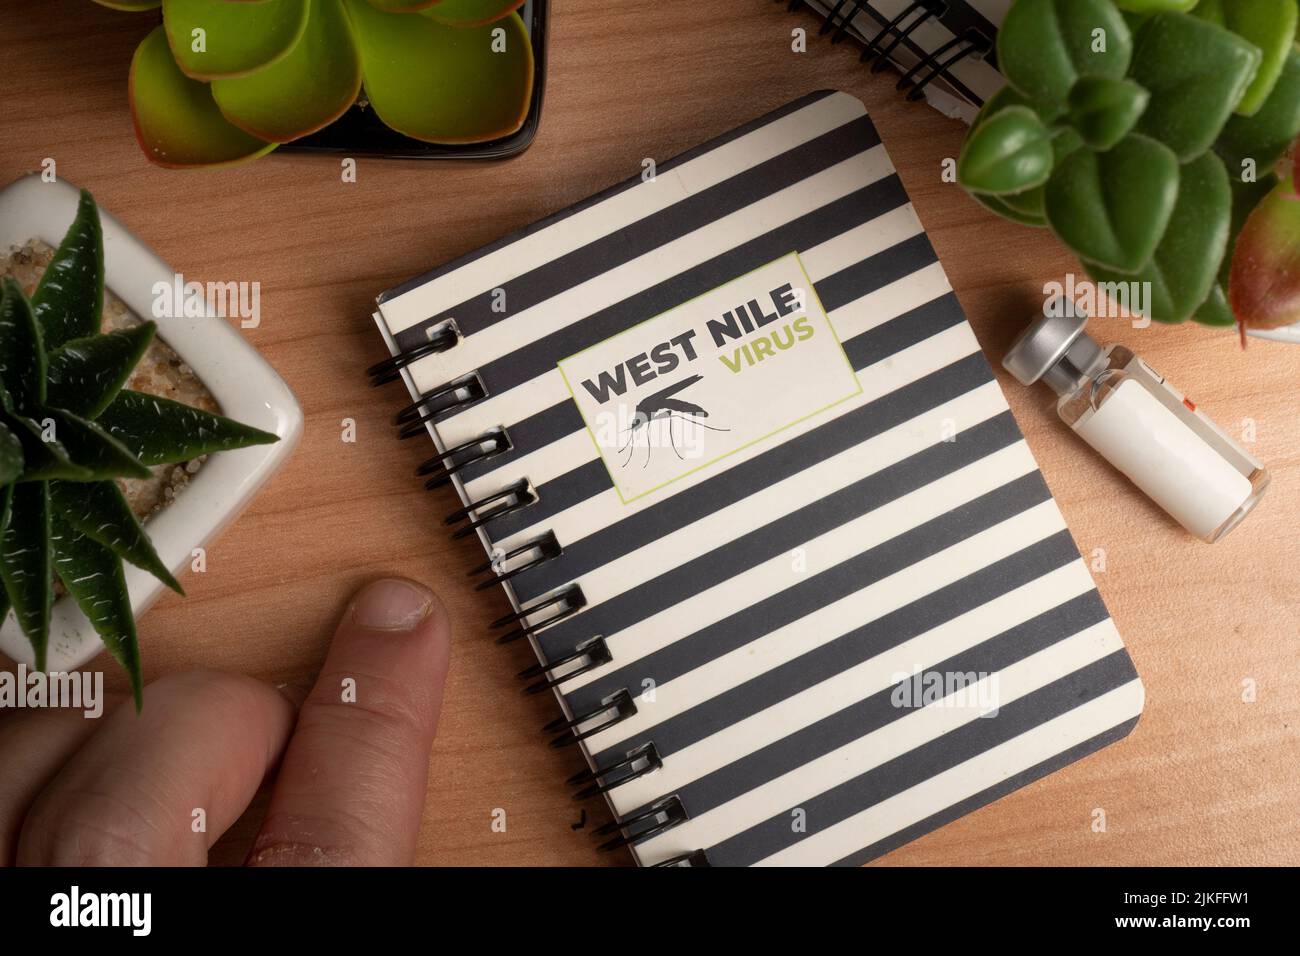 West nile virus concept: notebook on a wooden table with a vial and some plants Stock Photo